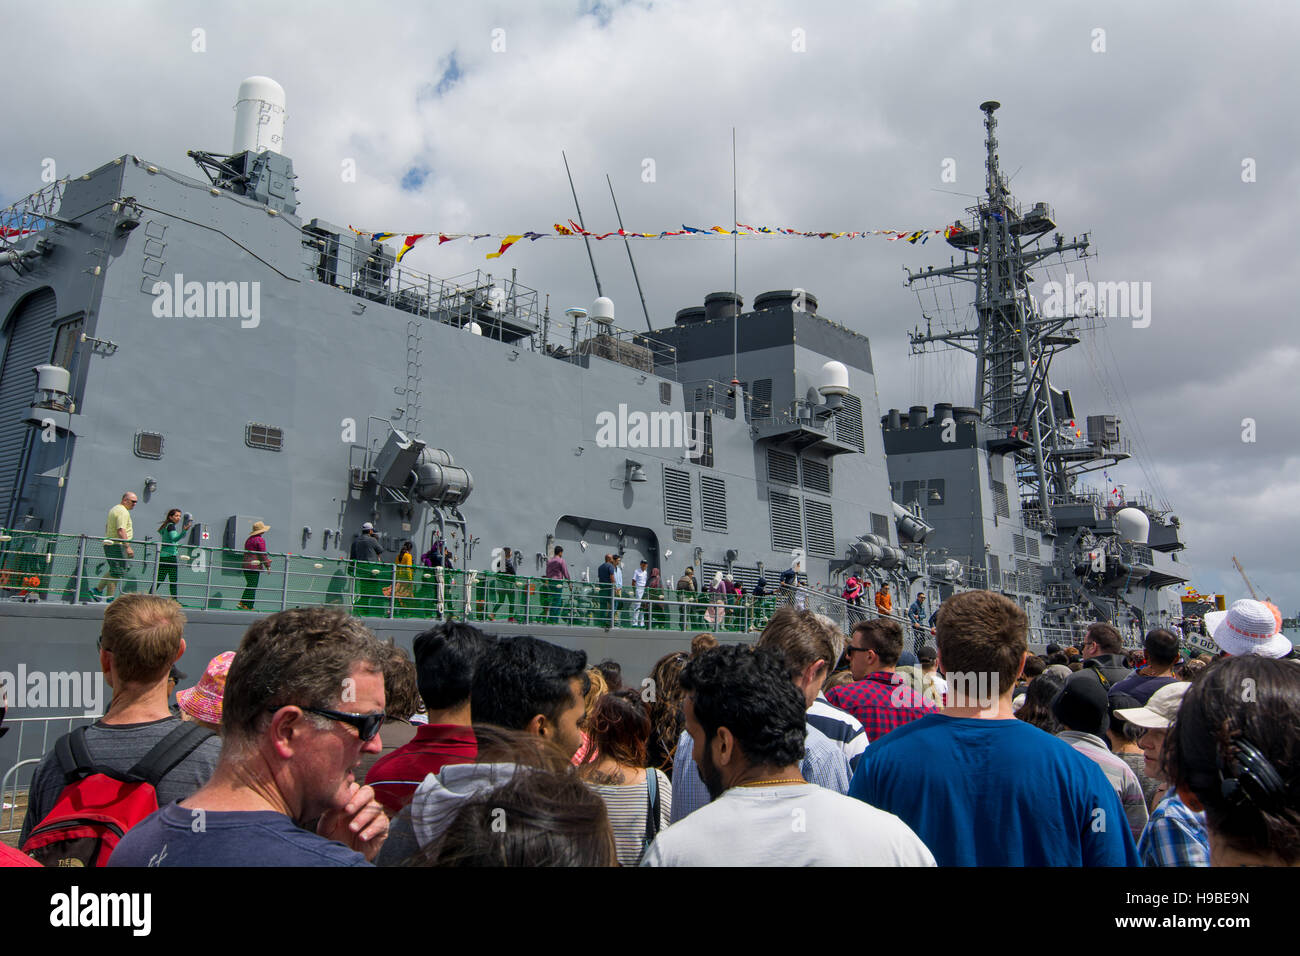 AUCKLAND, NEW ZEALAND - NOVEMBER 20, 2016 This year marks the 75th Anniversary of the foundation of New Zealand Navy. As part of the celebrations a number of ships from Japan, China, Republic of Korea, India, Indonesia, Singapore, and New Zealand were open to the public. Credit:  Vadim Boussenko/Alamy Live News Stock Photo